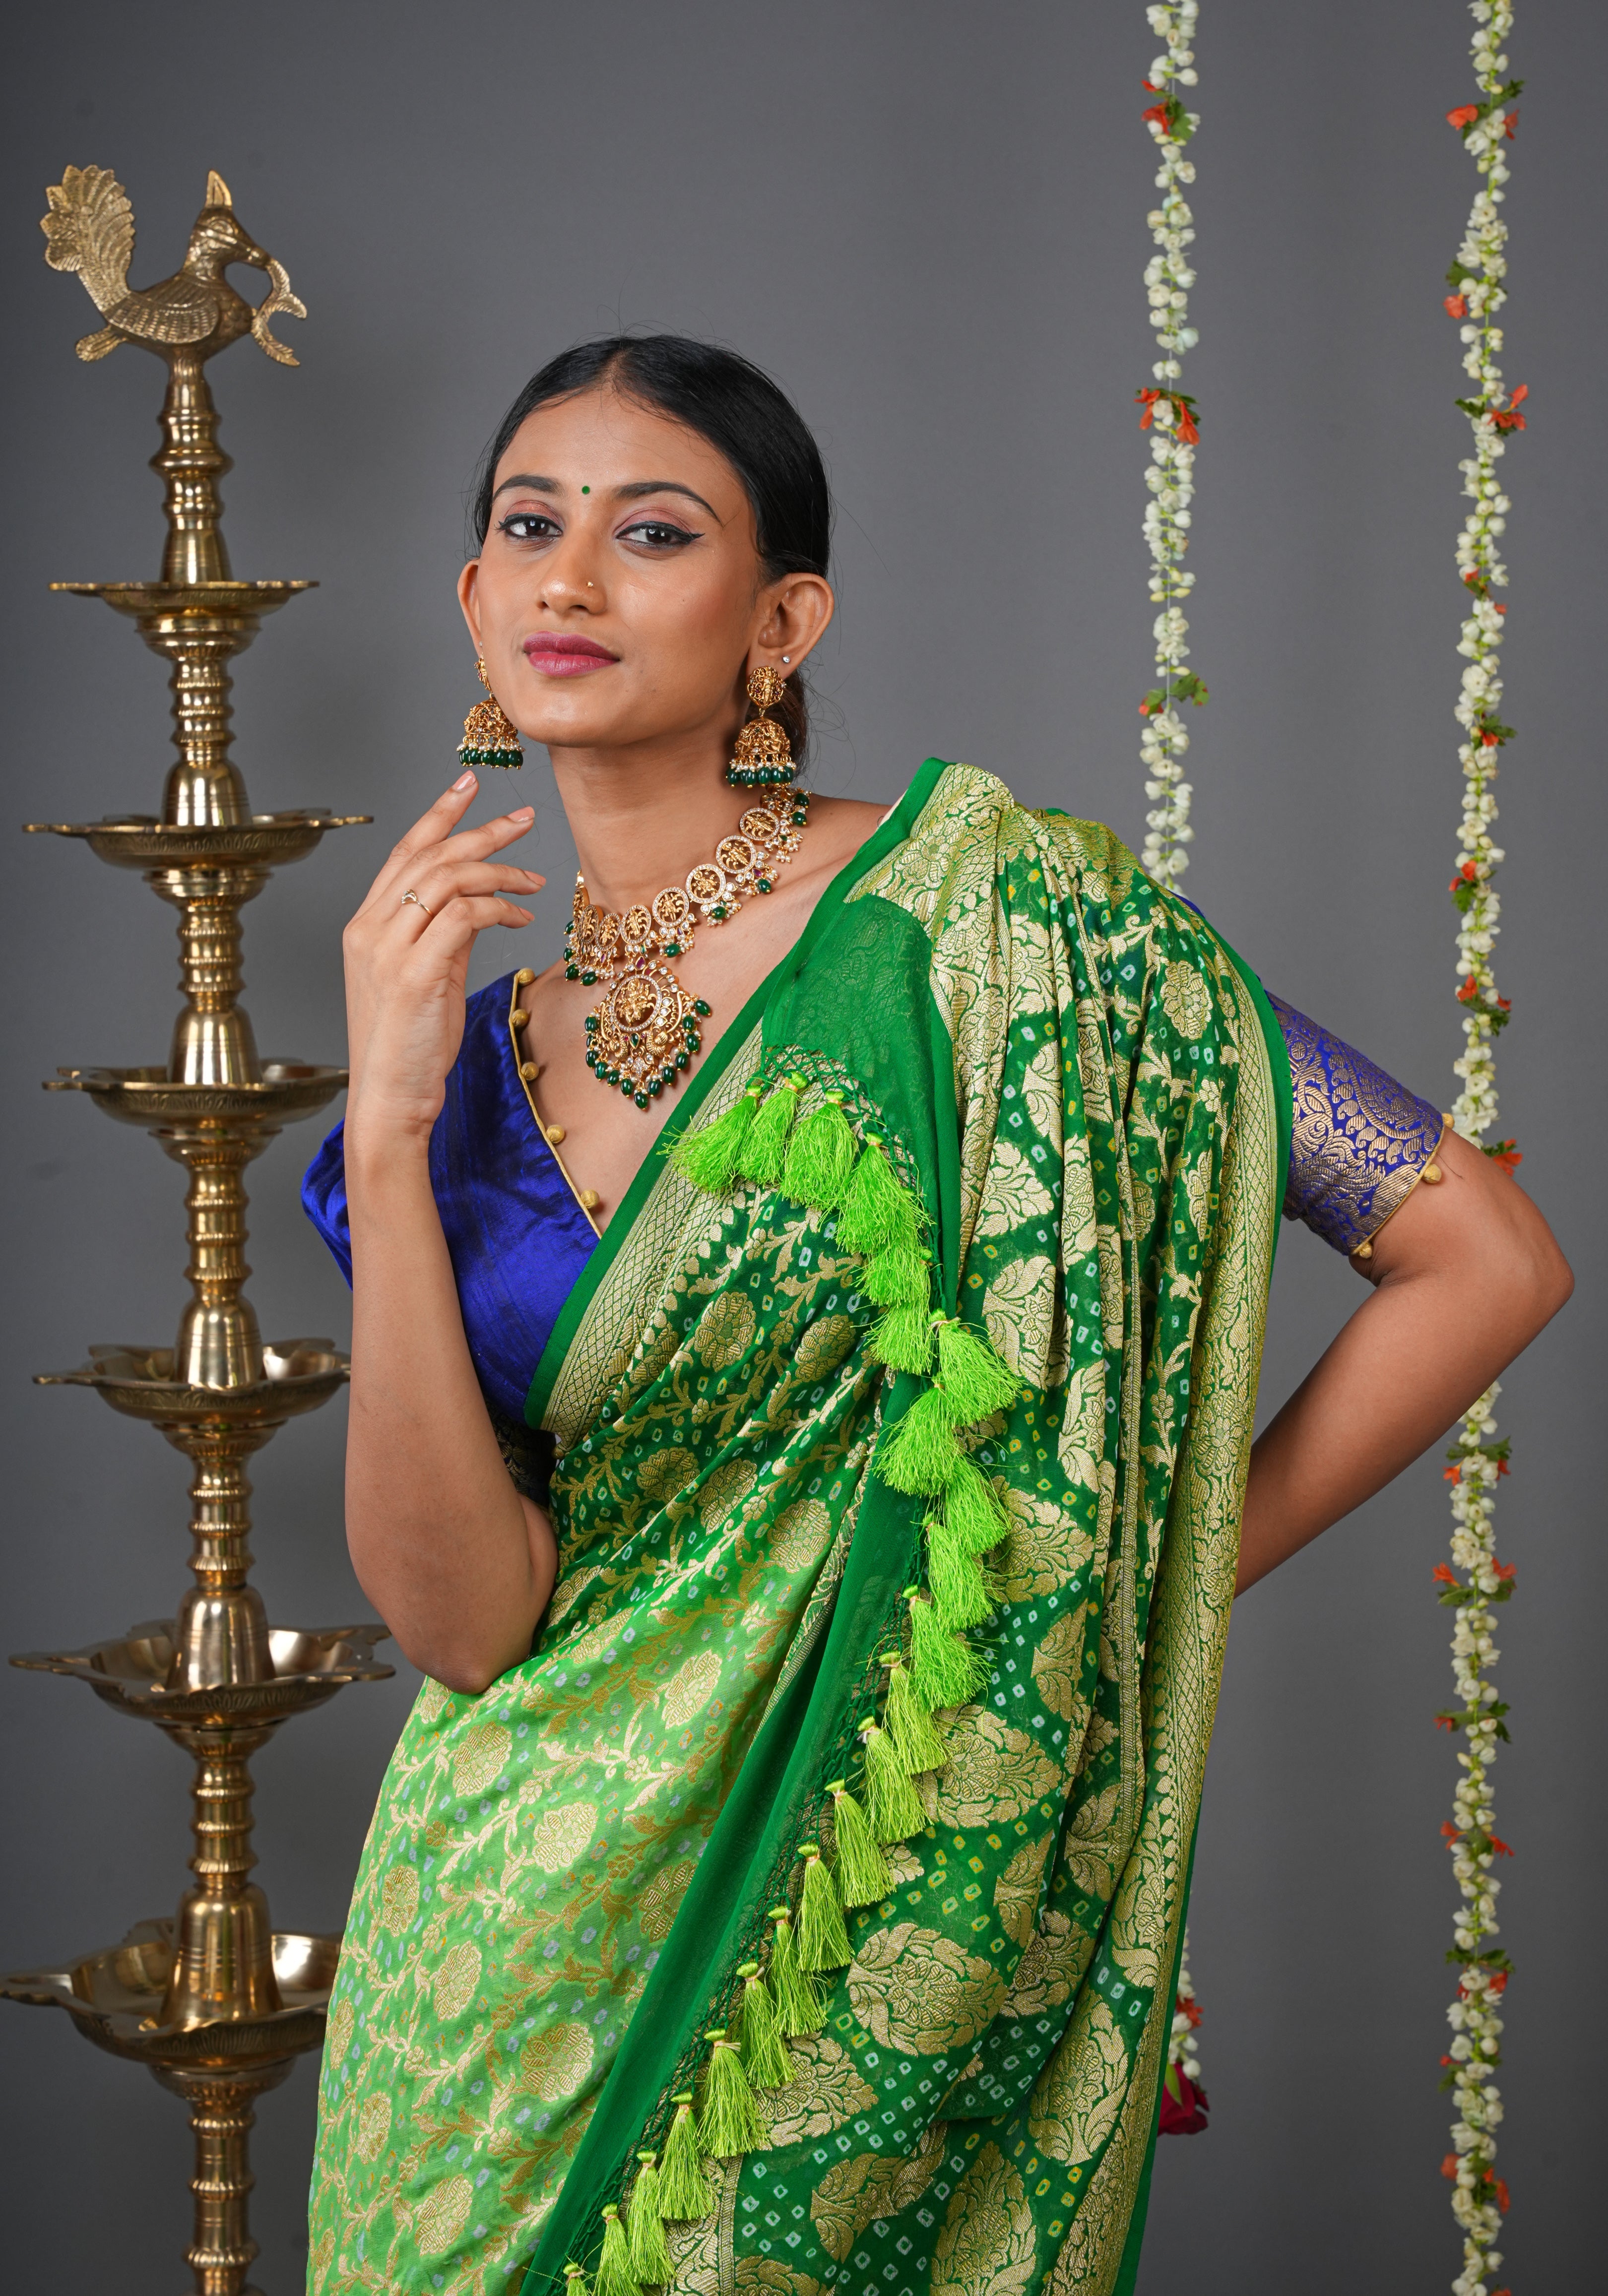 Authentic Hand Bandhej Banarasi Silk Georgette Saree in Ombre shades of Green  | SILK MARK CERTIFIED